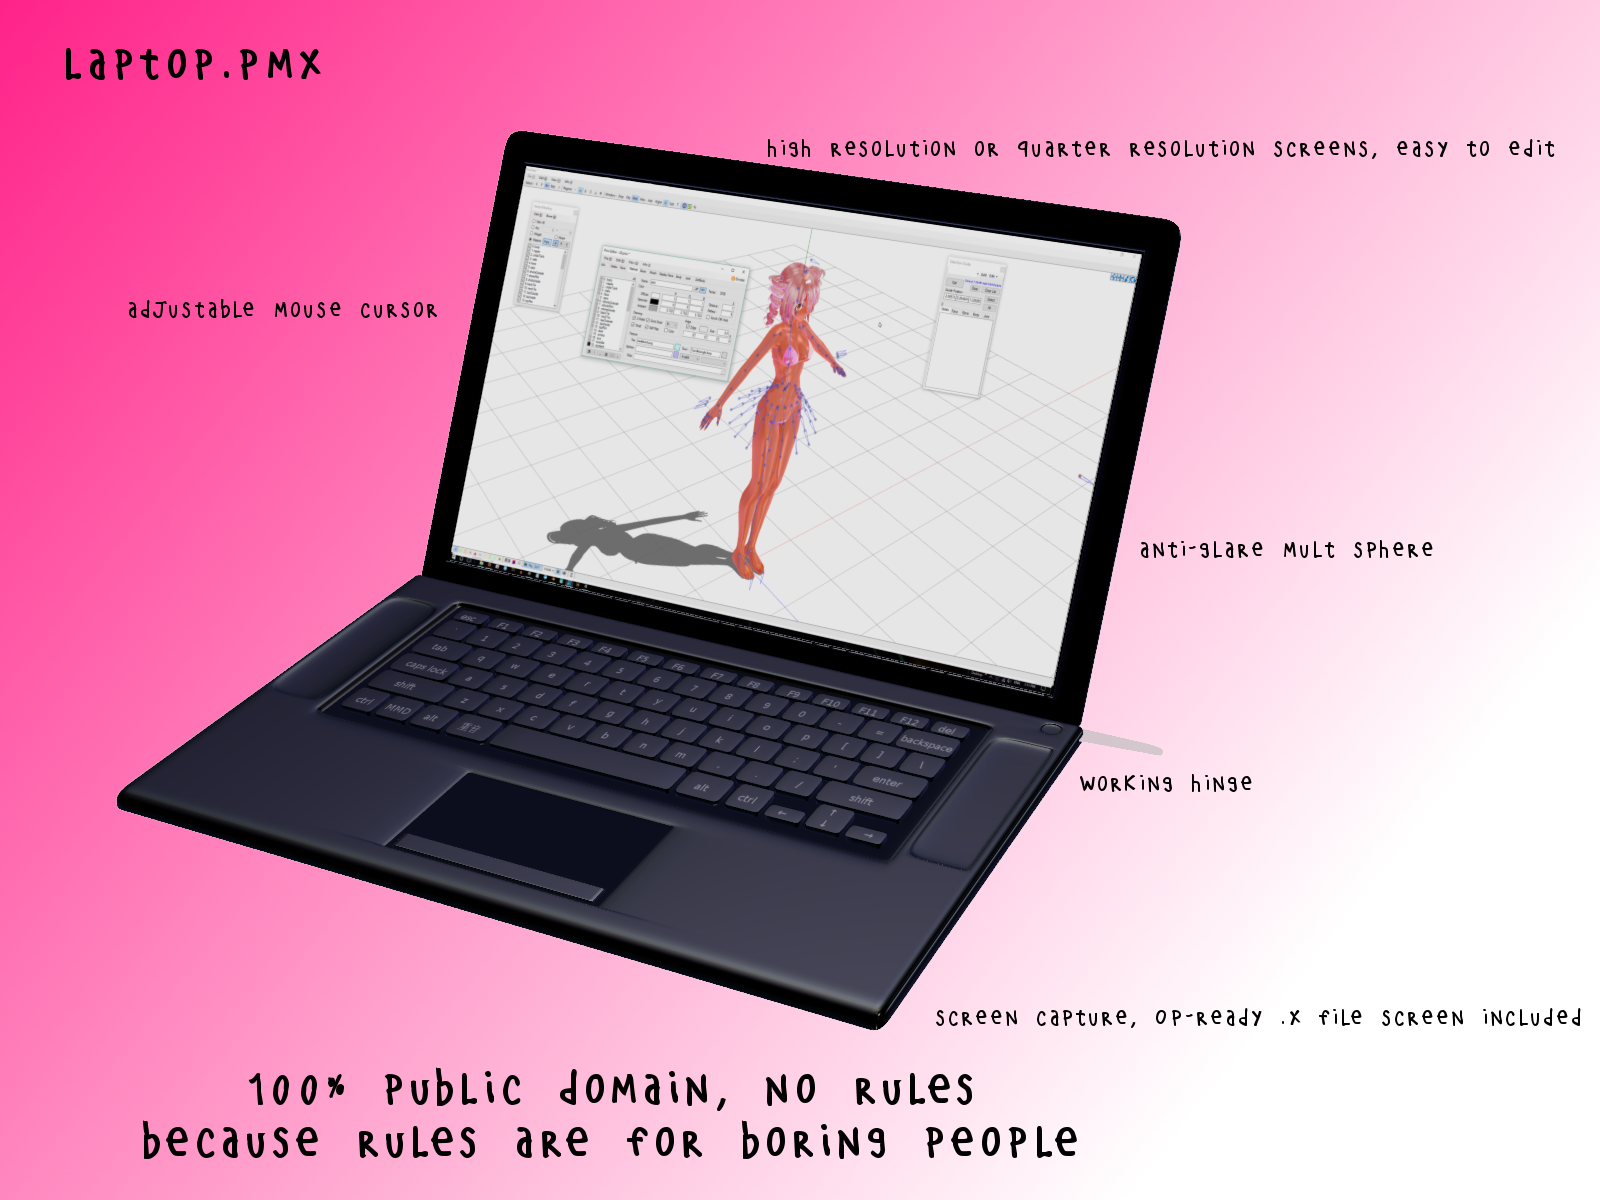 Laptop.pmx for MMD